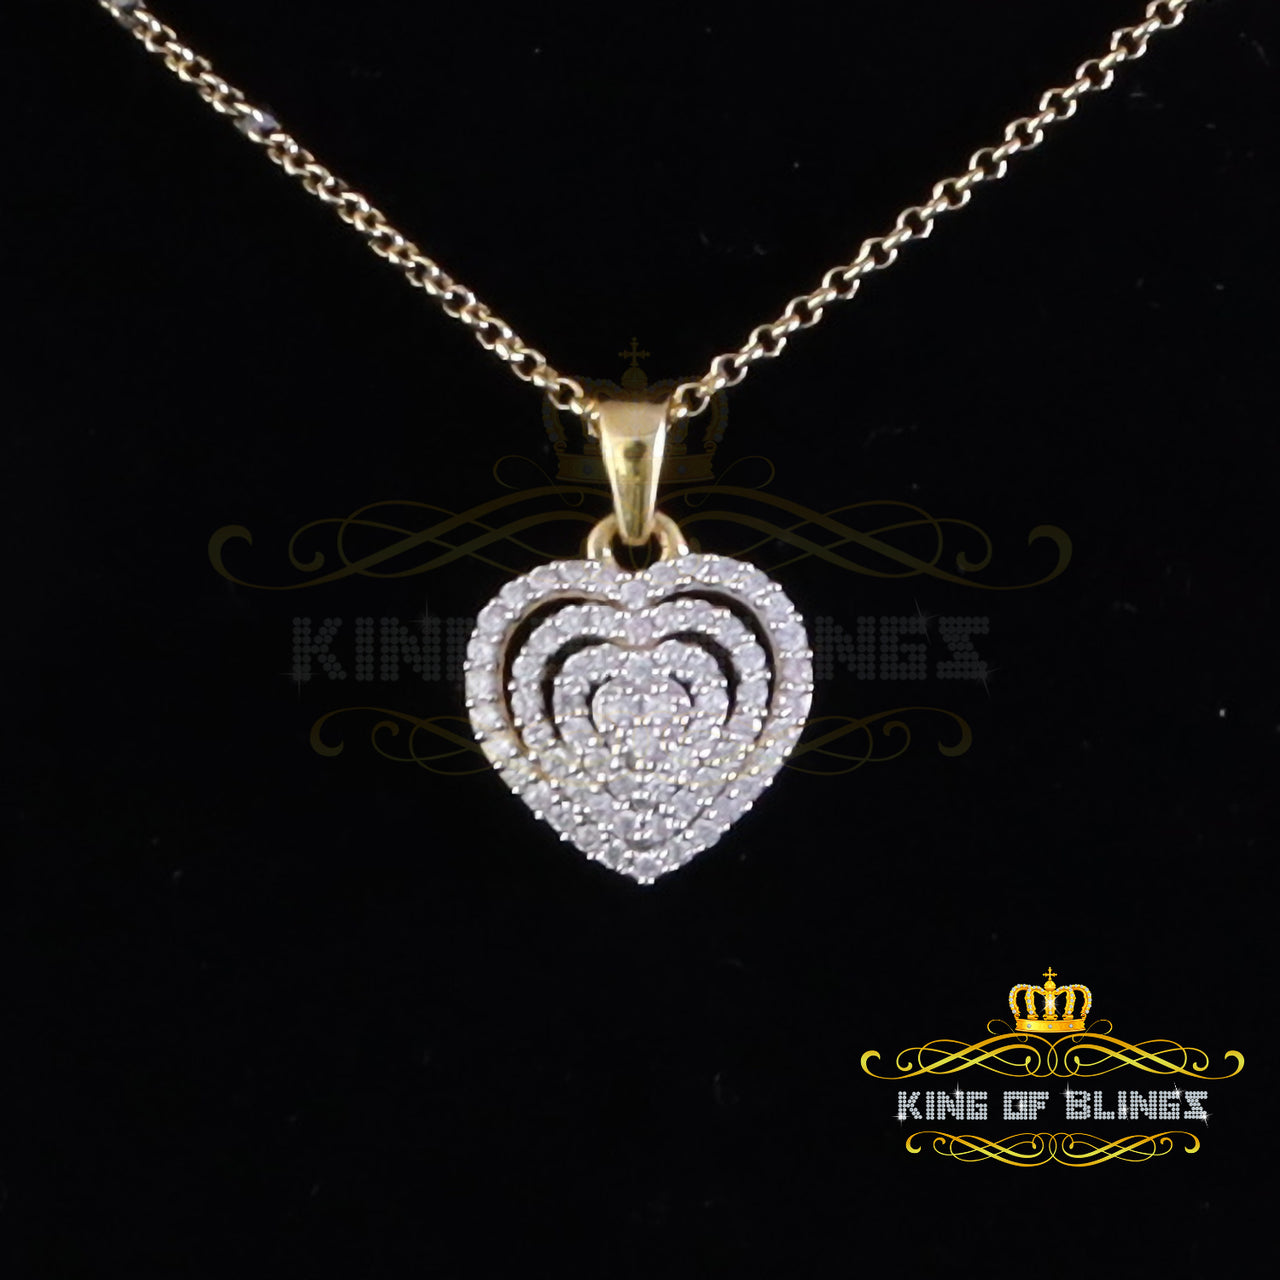 King Of Bling's Yellow 925 Sterling Silver Heart Shape Pendant with 0.87ct Cubic Zirconia